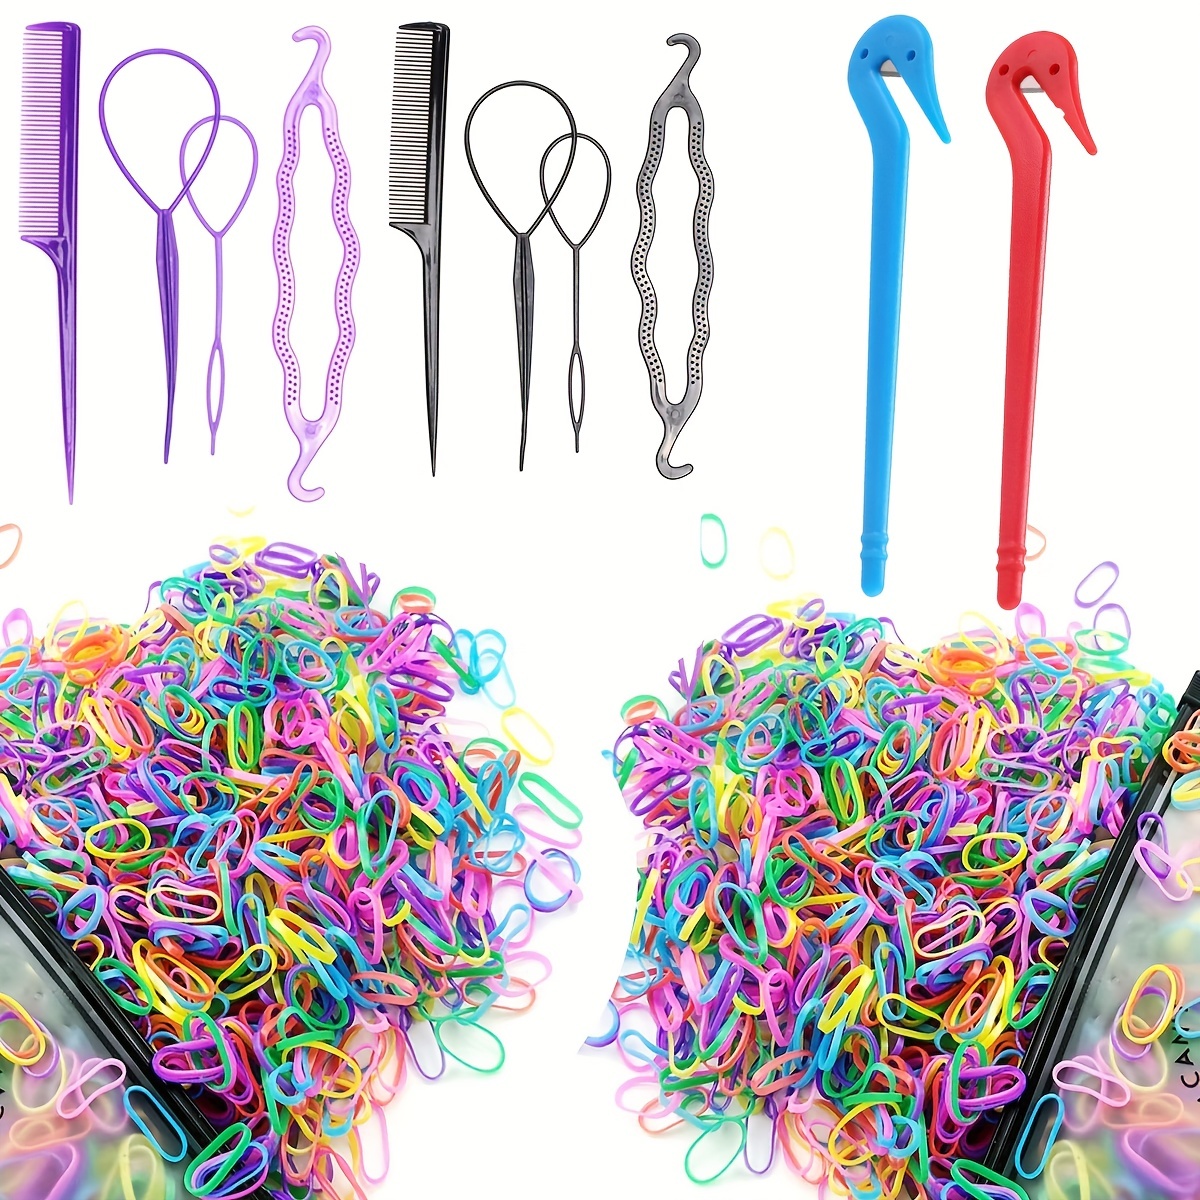 1512Pcs Hair Braiding Tool Set Rubber Bands With Hair Loop Styling Tool,  Colorful Small Hair Elastics With Hair Tie Cutter(Color Randomly), Topsy  Pony